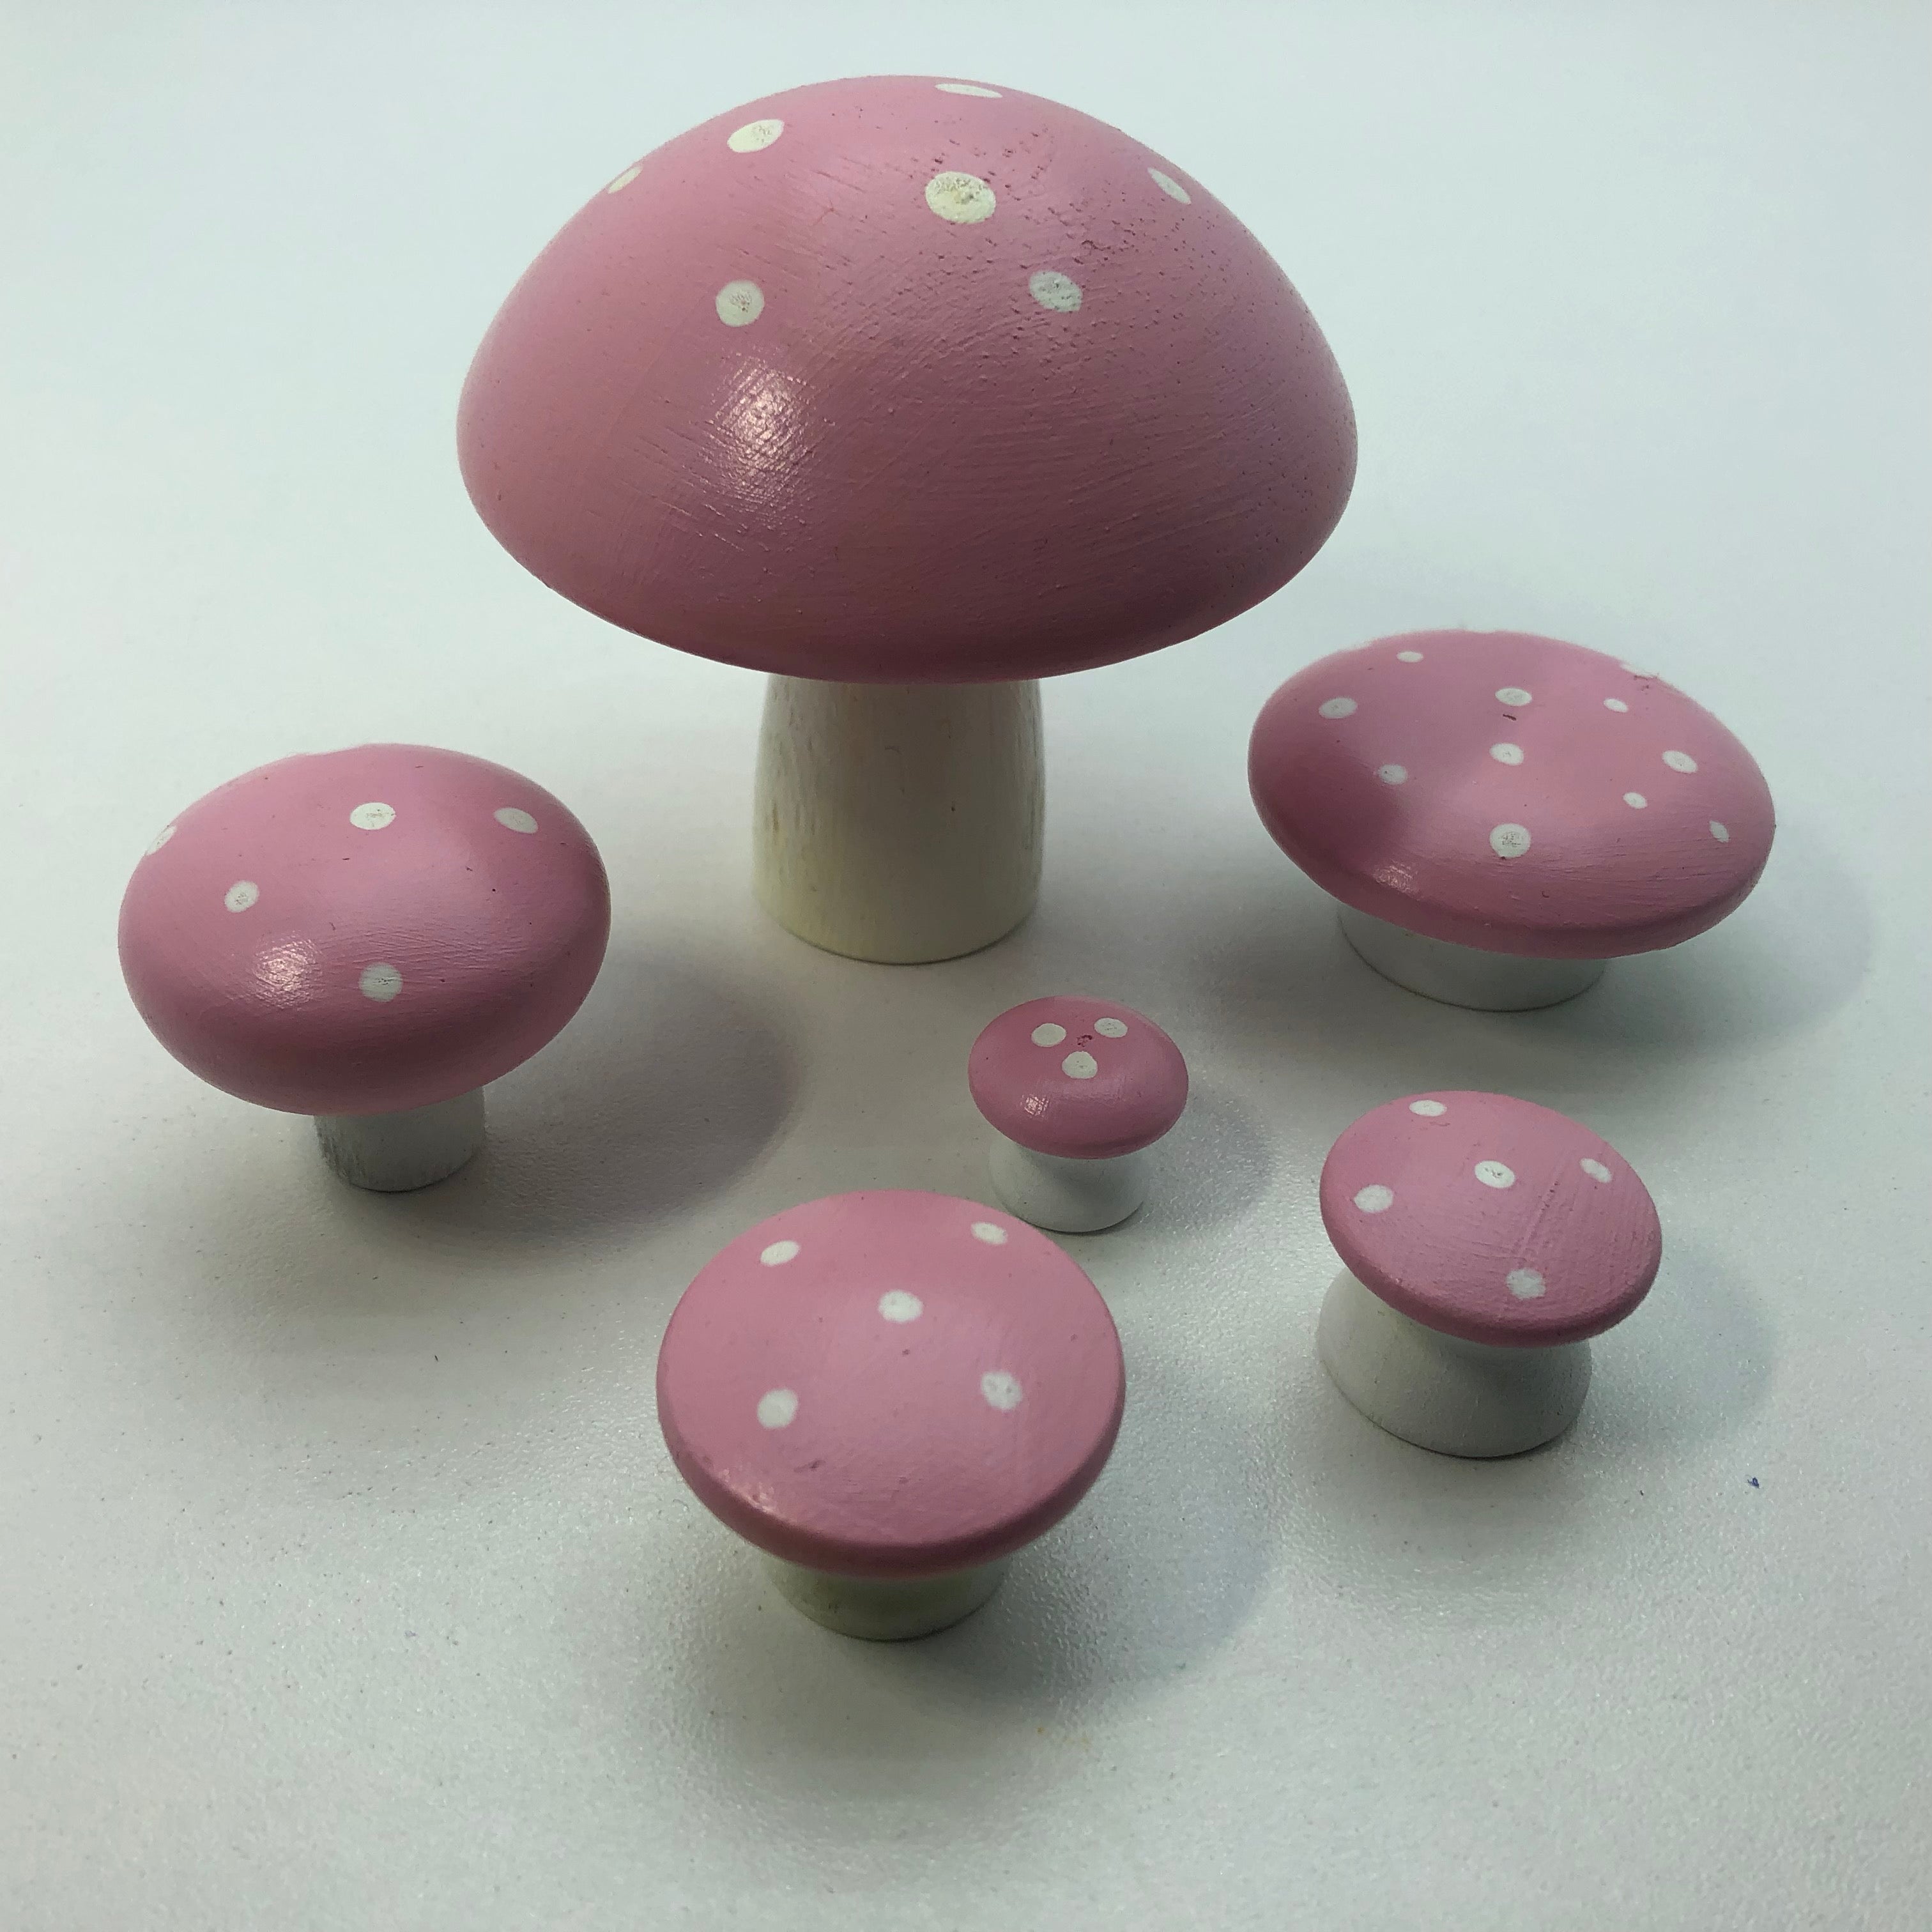 Timber toy mushrooms red open ended play